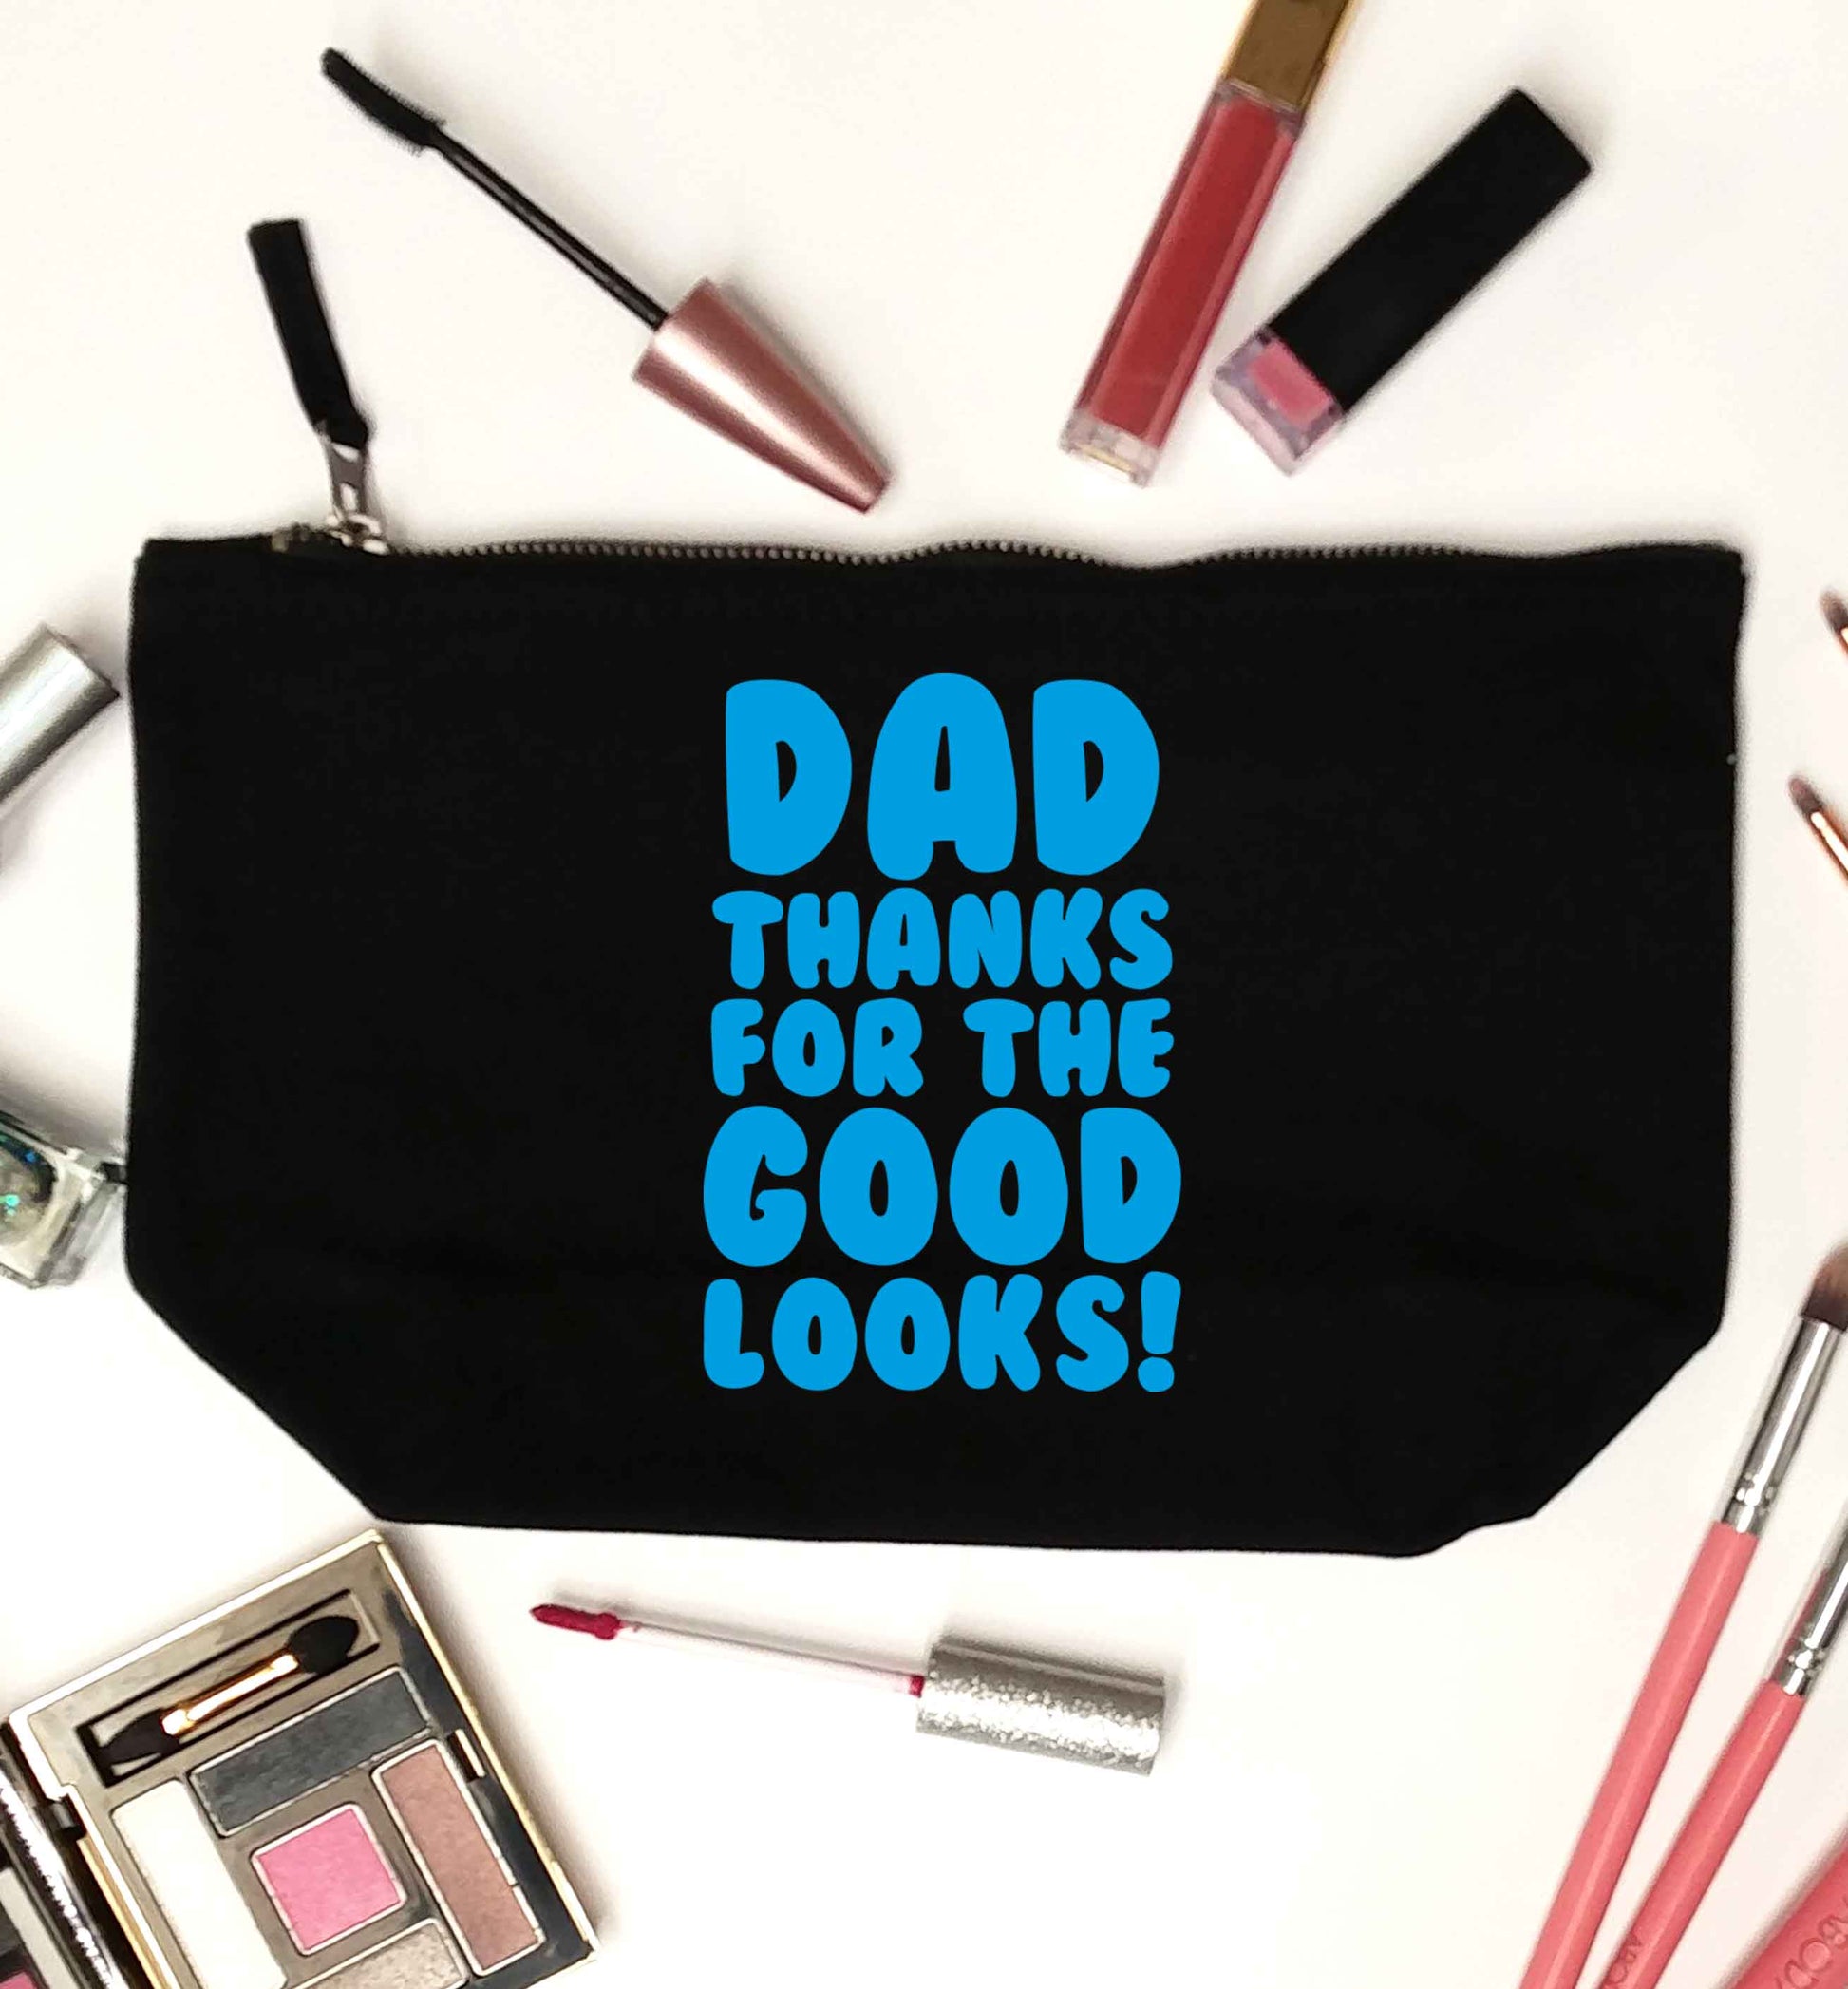 Dad thanks for the good looks black makeup bag